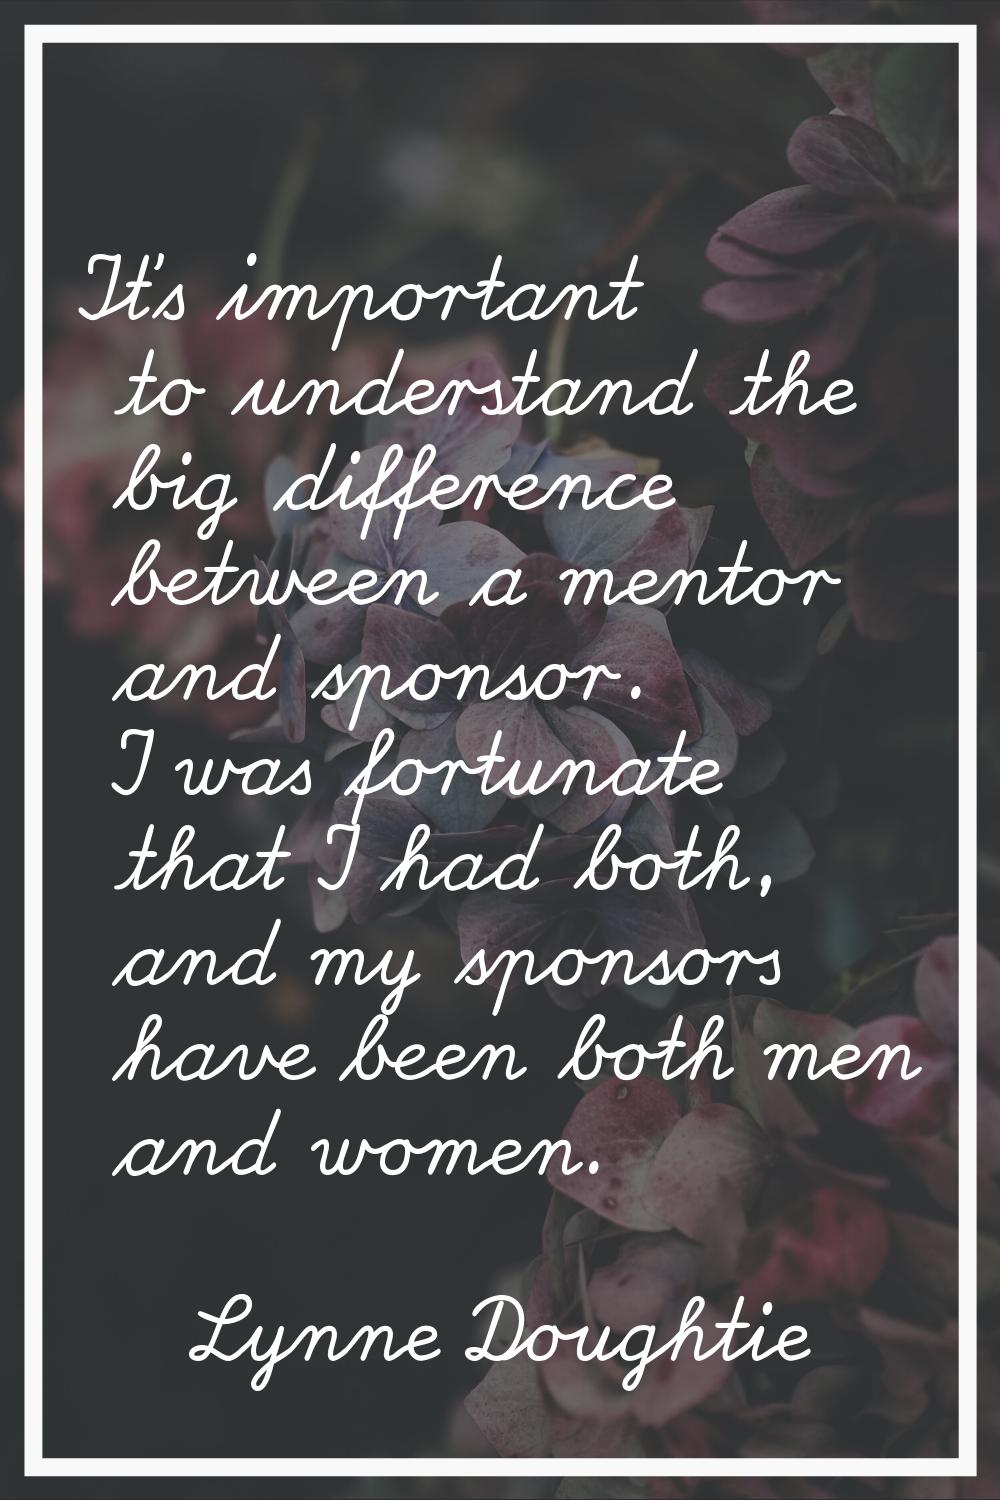 It's important to understand the big difference between a mentor and sponsor. I was fortunate that 